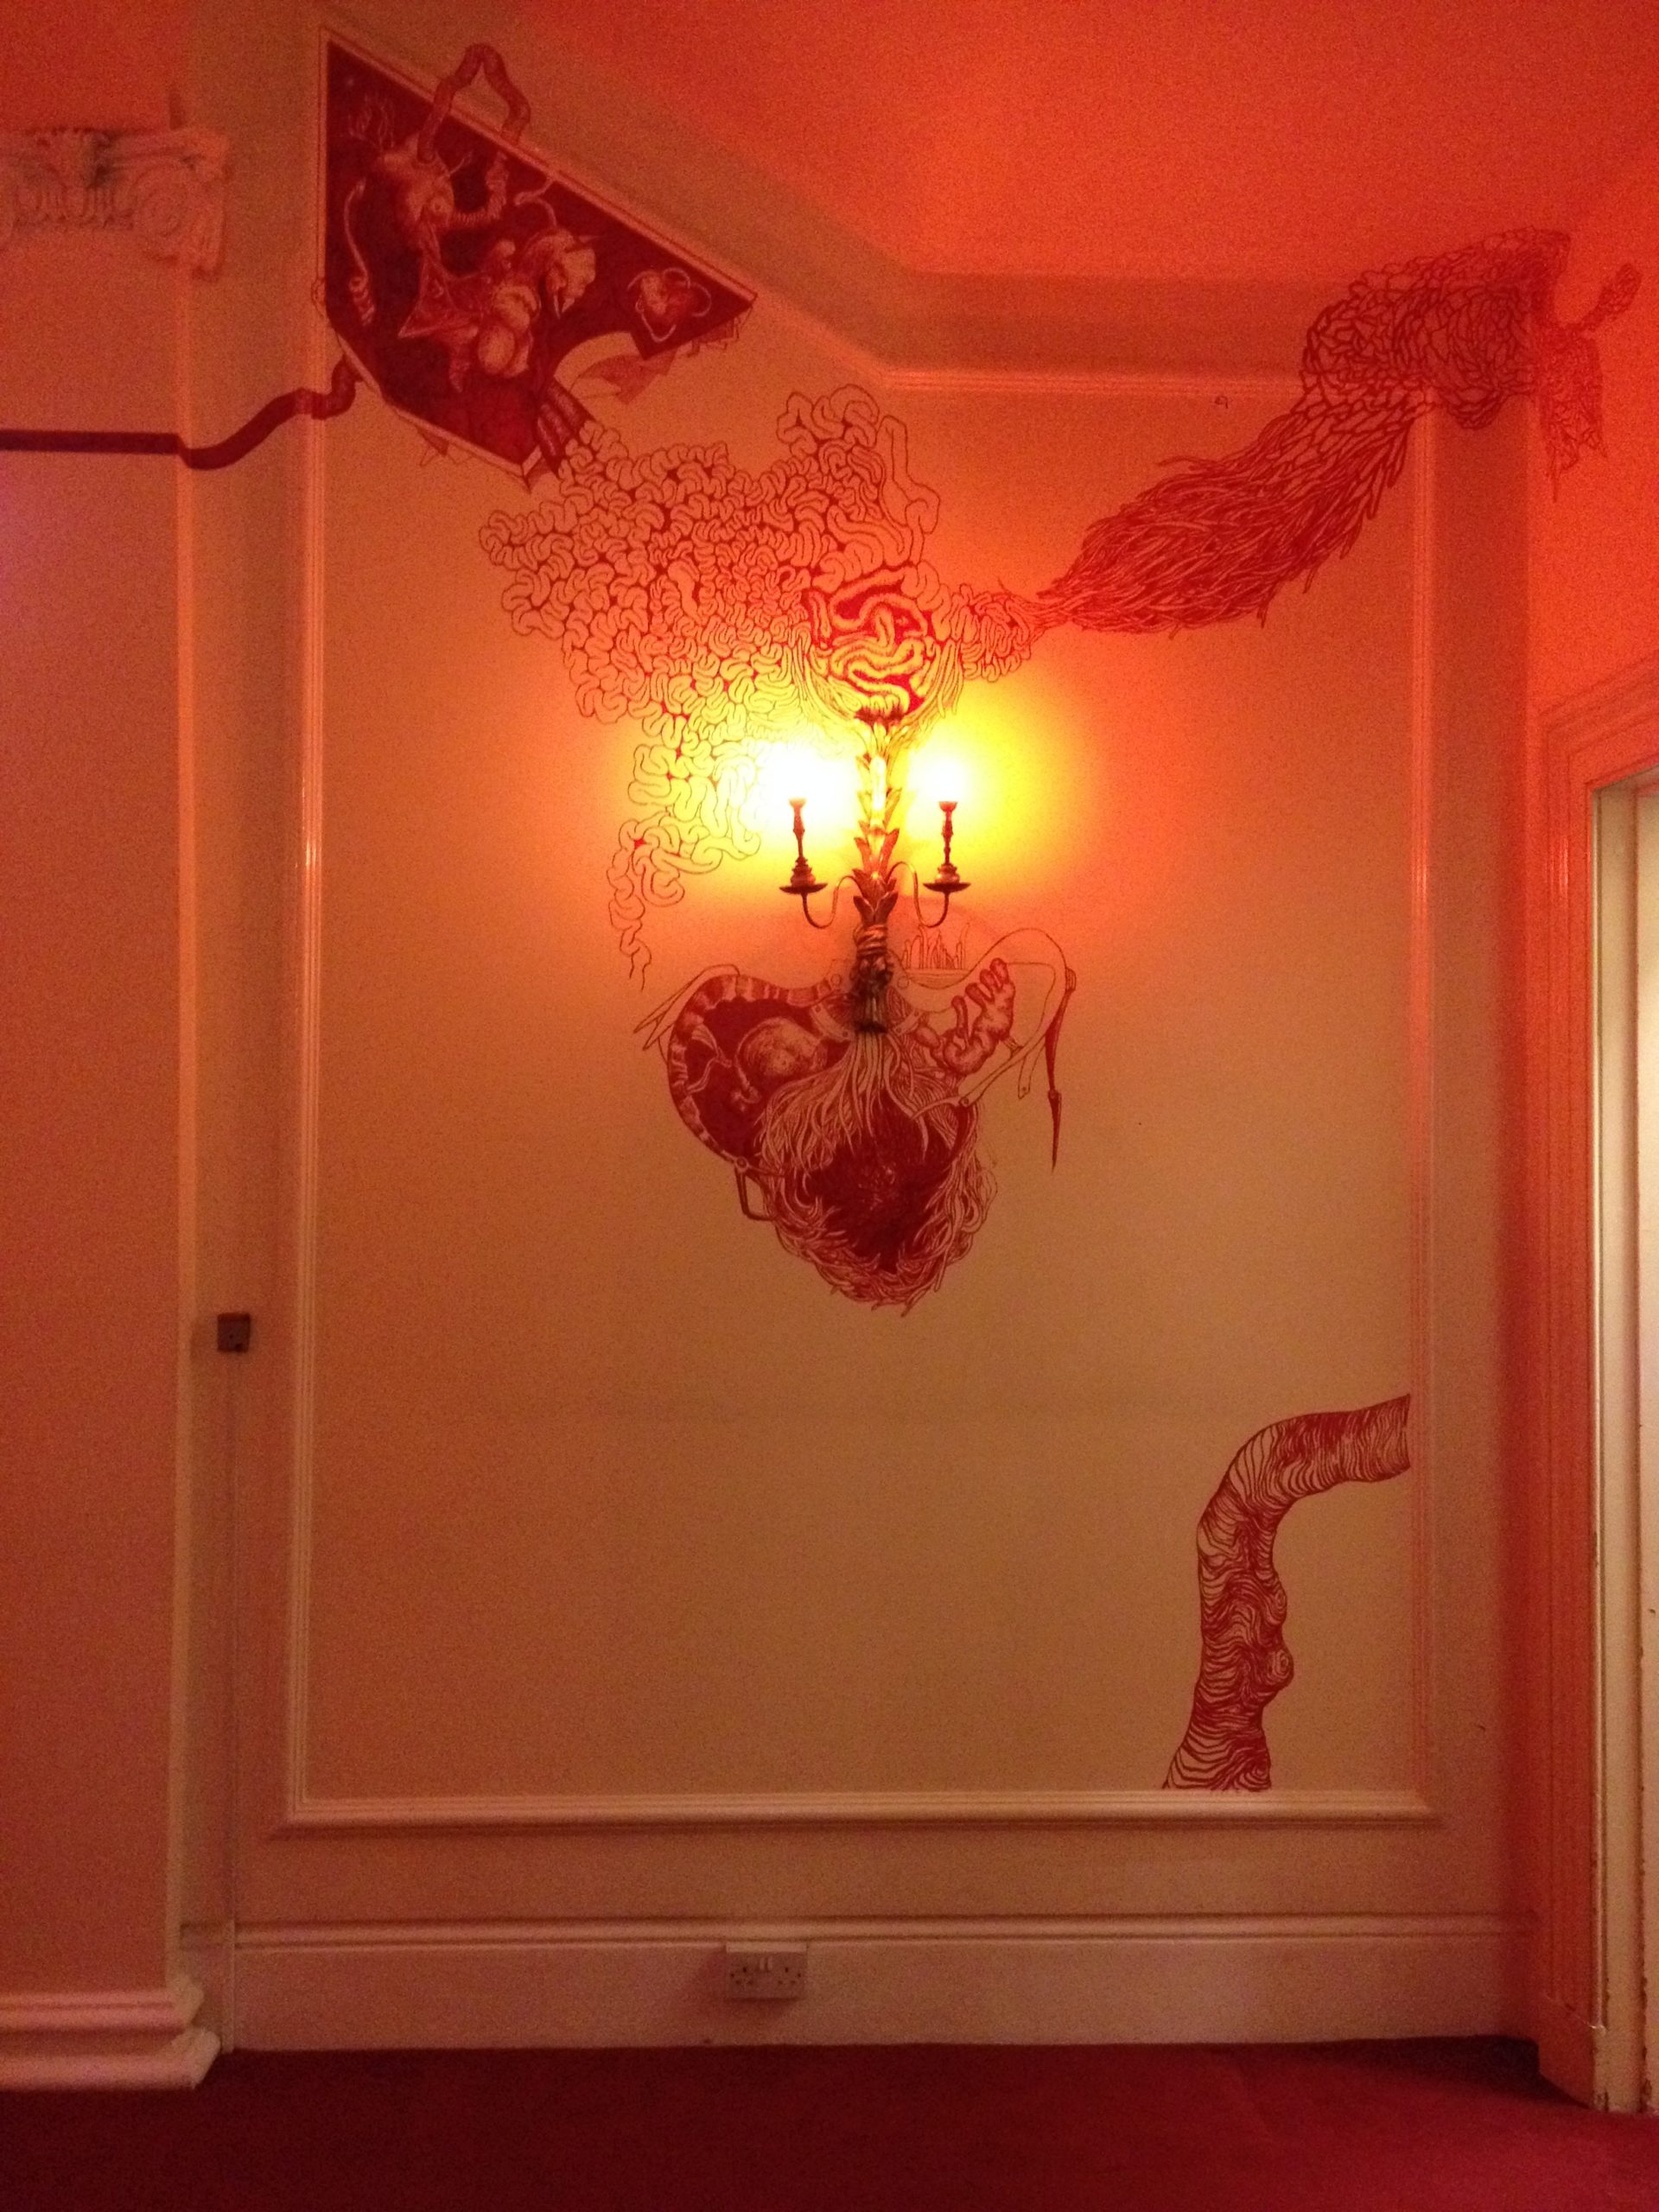 10 – Gardnerella. Drawing in situ. Red alcohol based ink on walls. Tunisia The new picture, Tunisian Embassy. London. 2016.